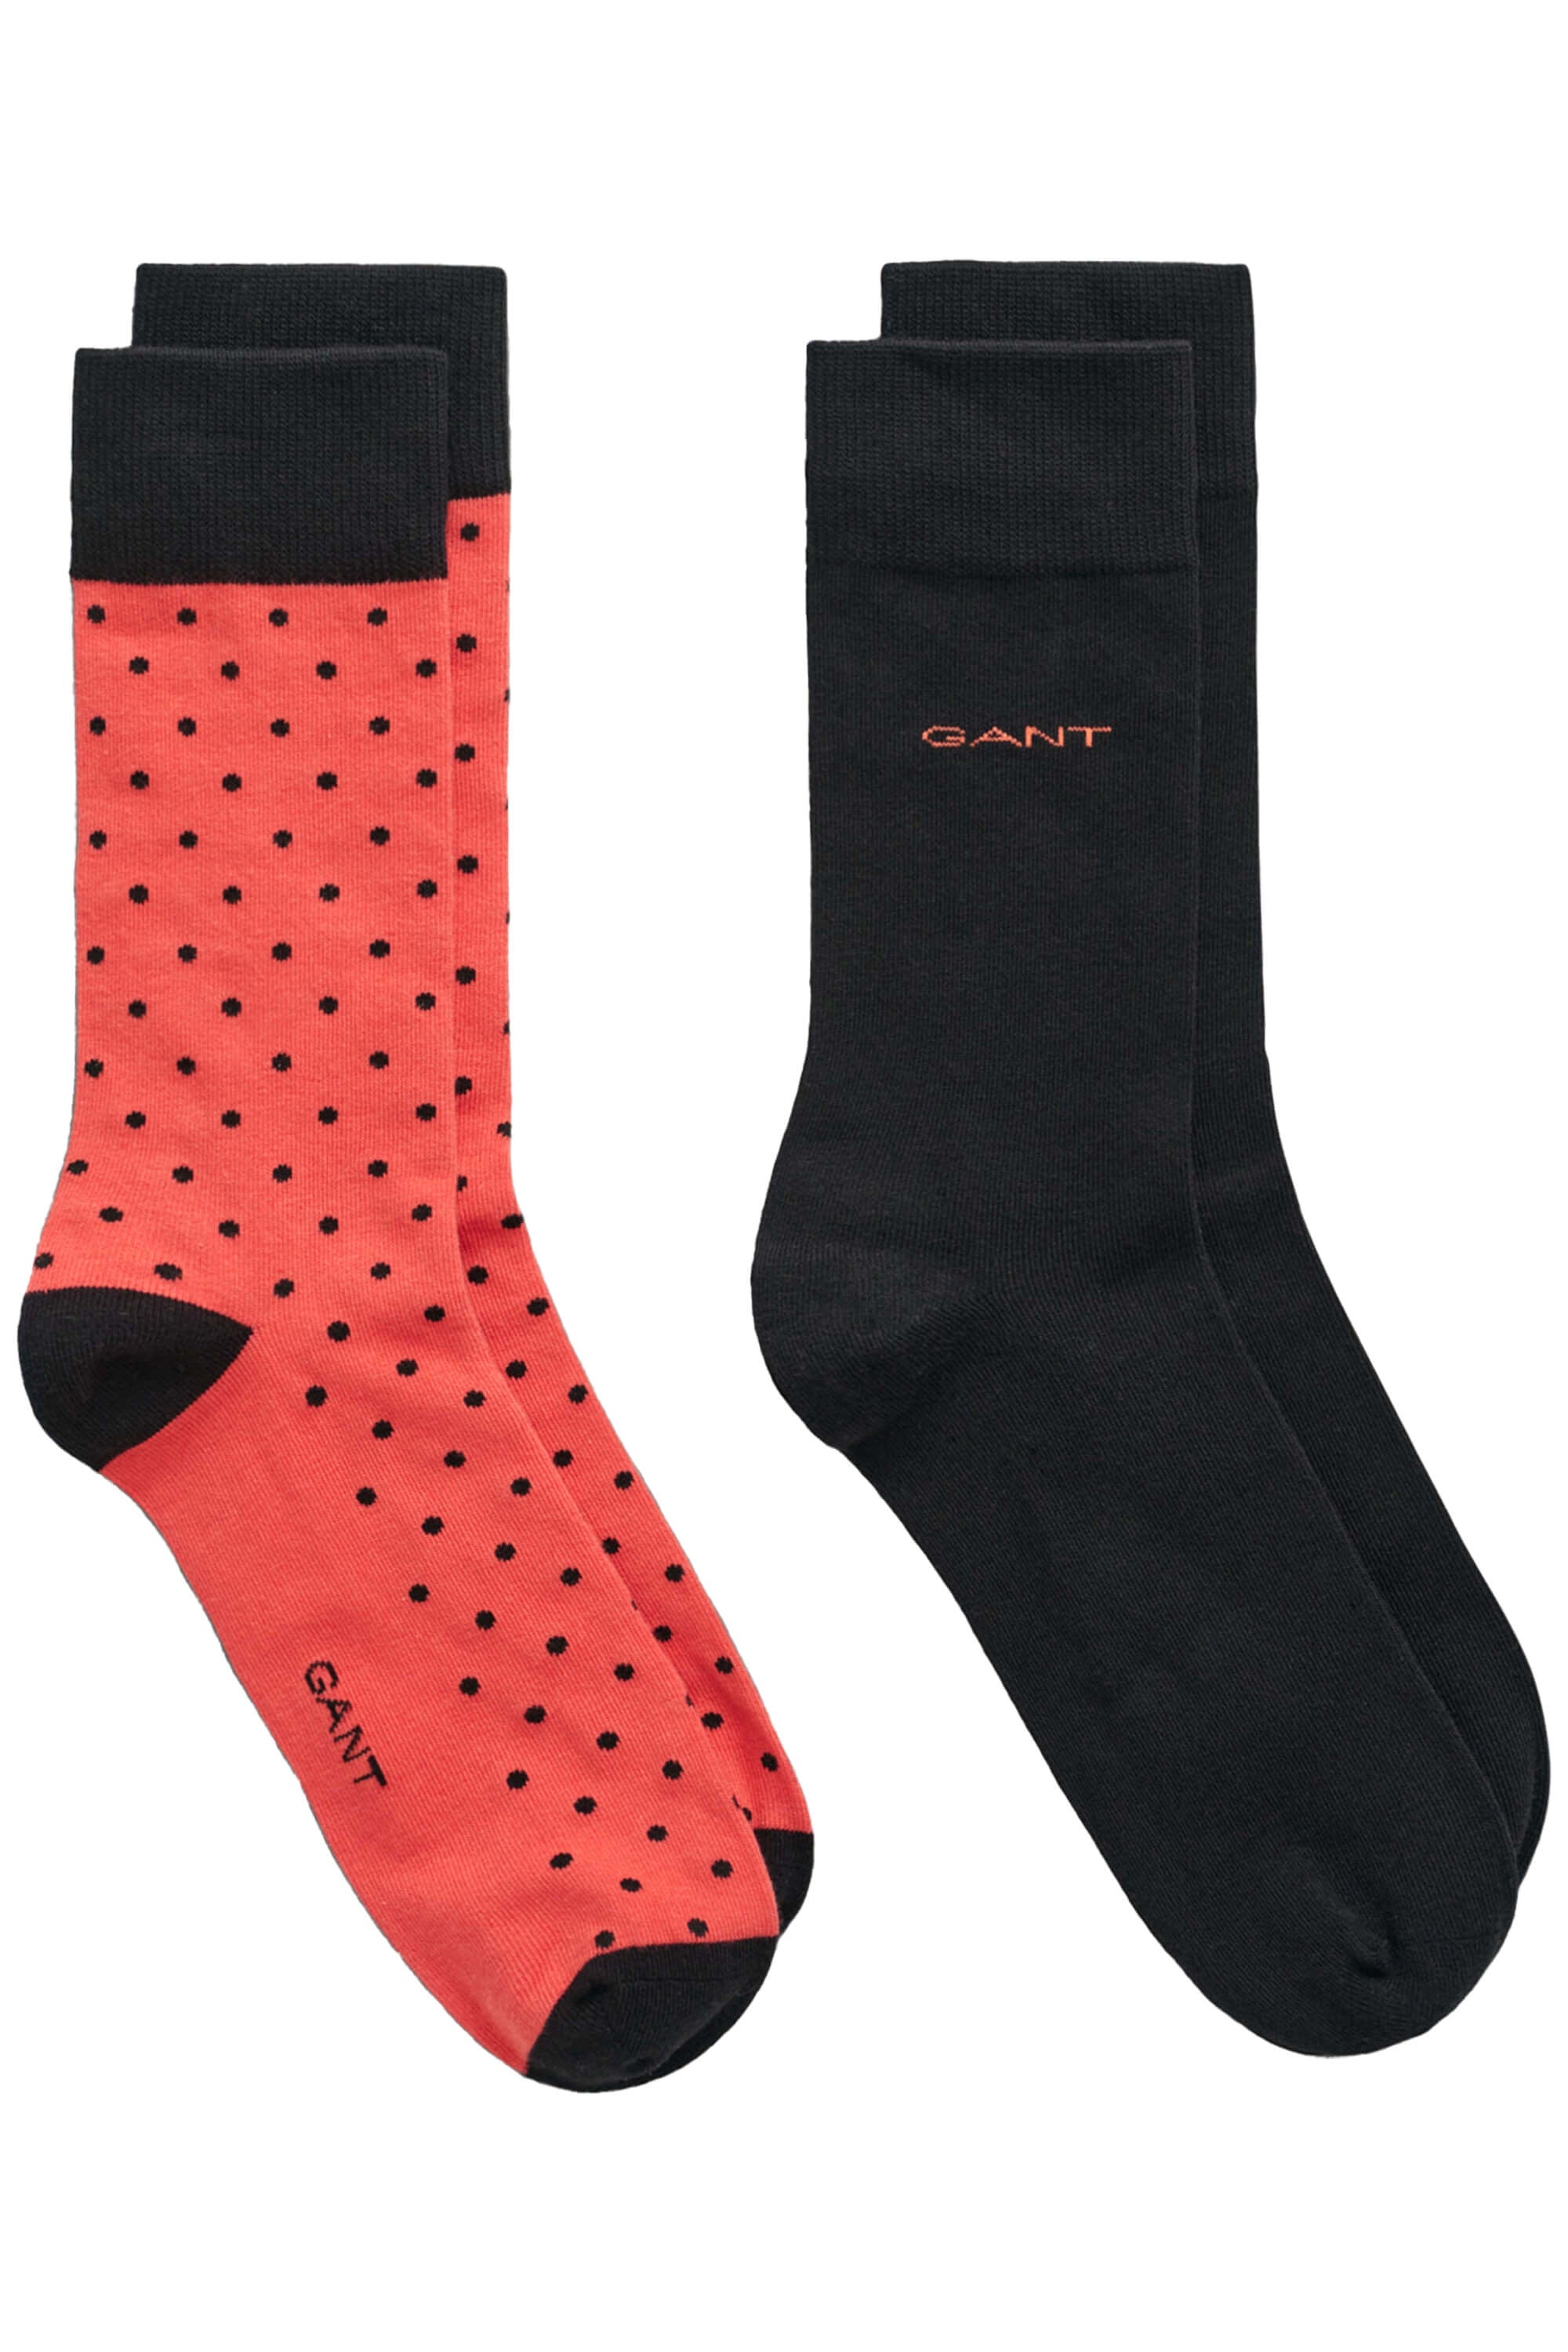 Gant Dot and Solid 2 Pack